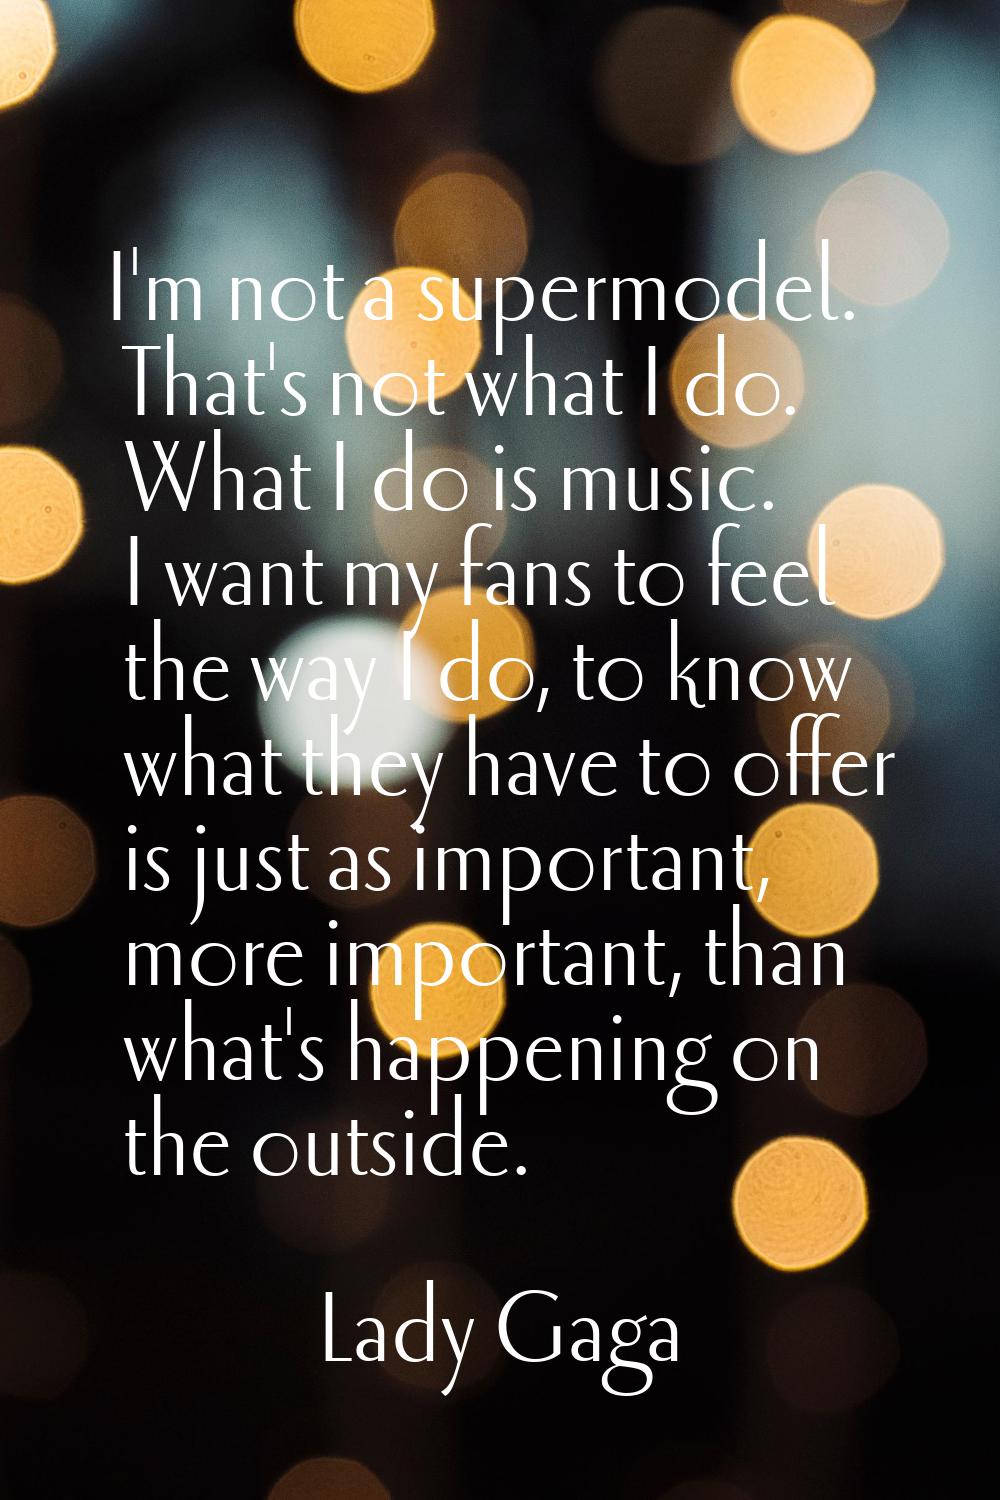 I'm not a supermodel. That's not what I do. What I do is music. I want my fans to feel the way I do